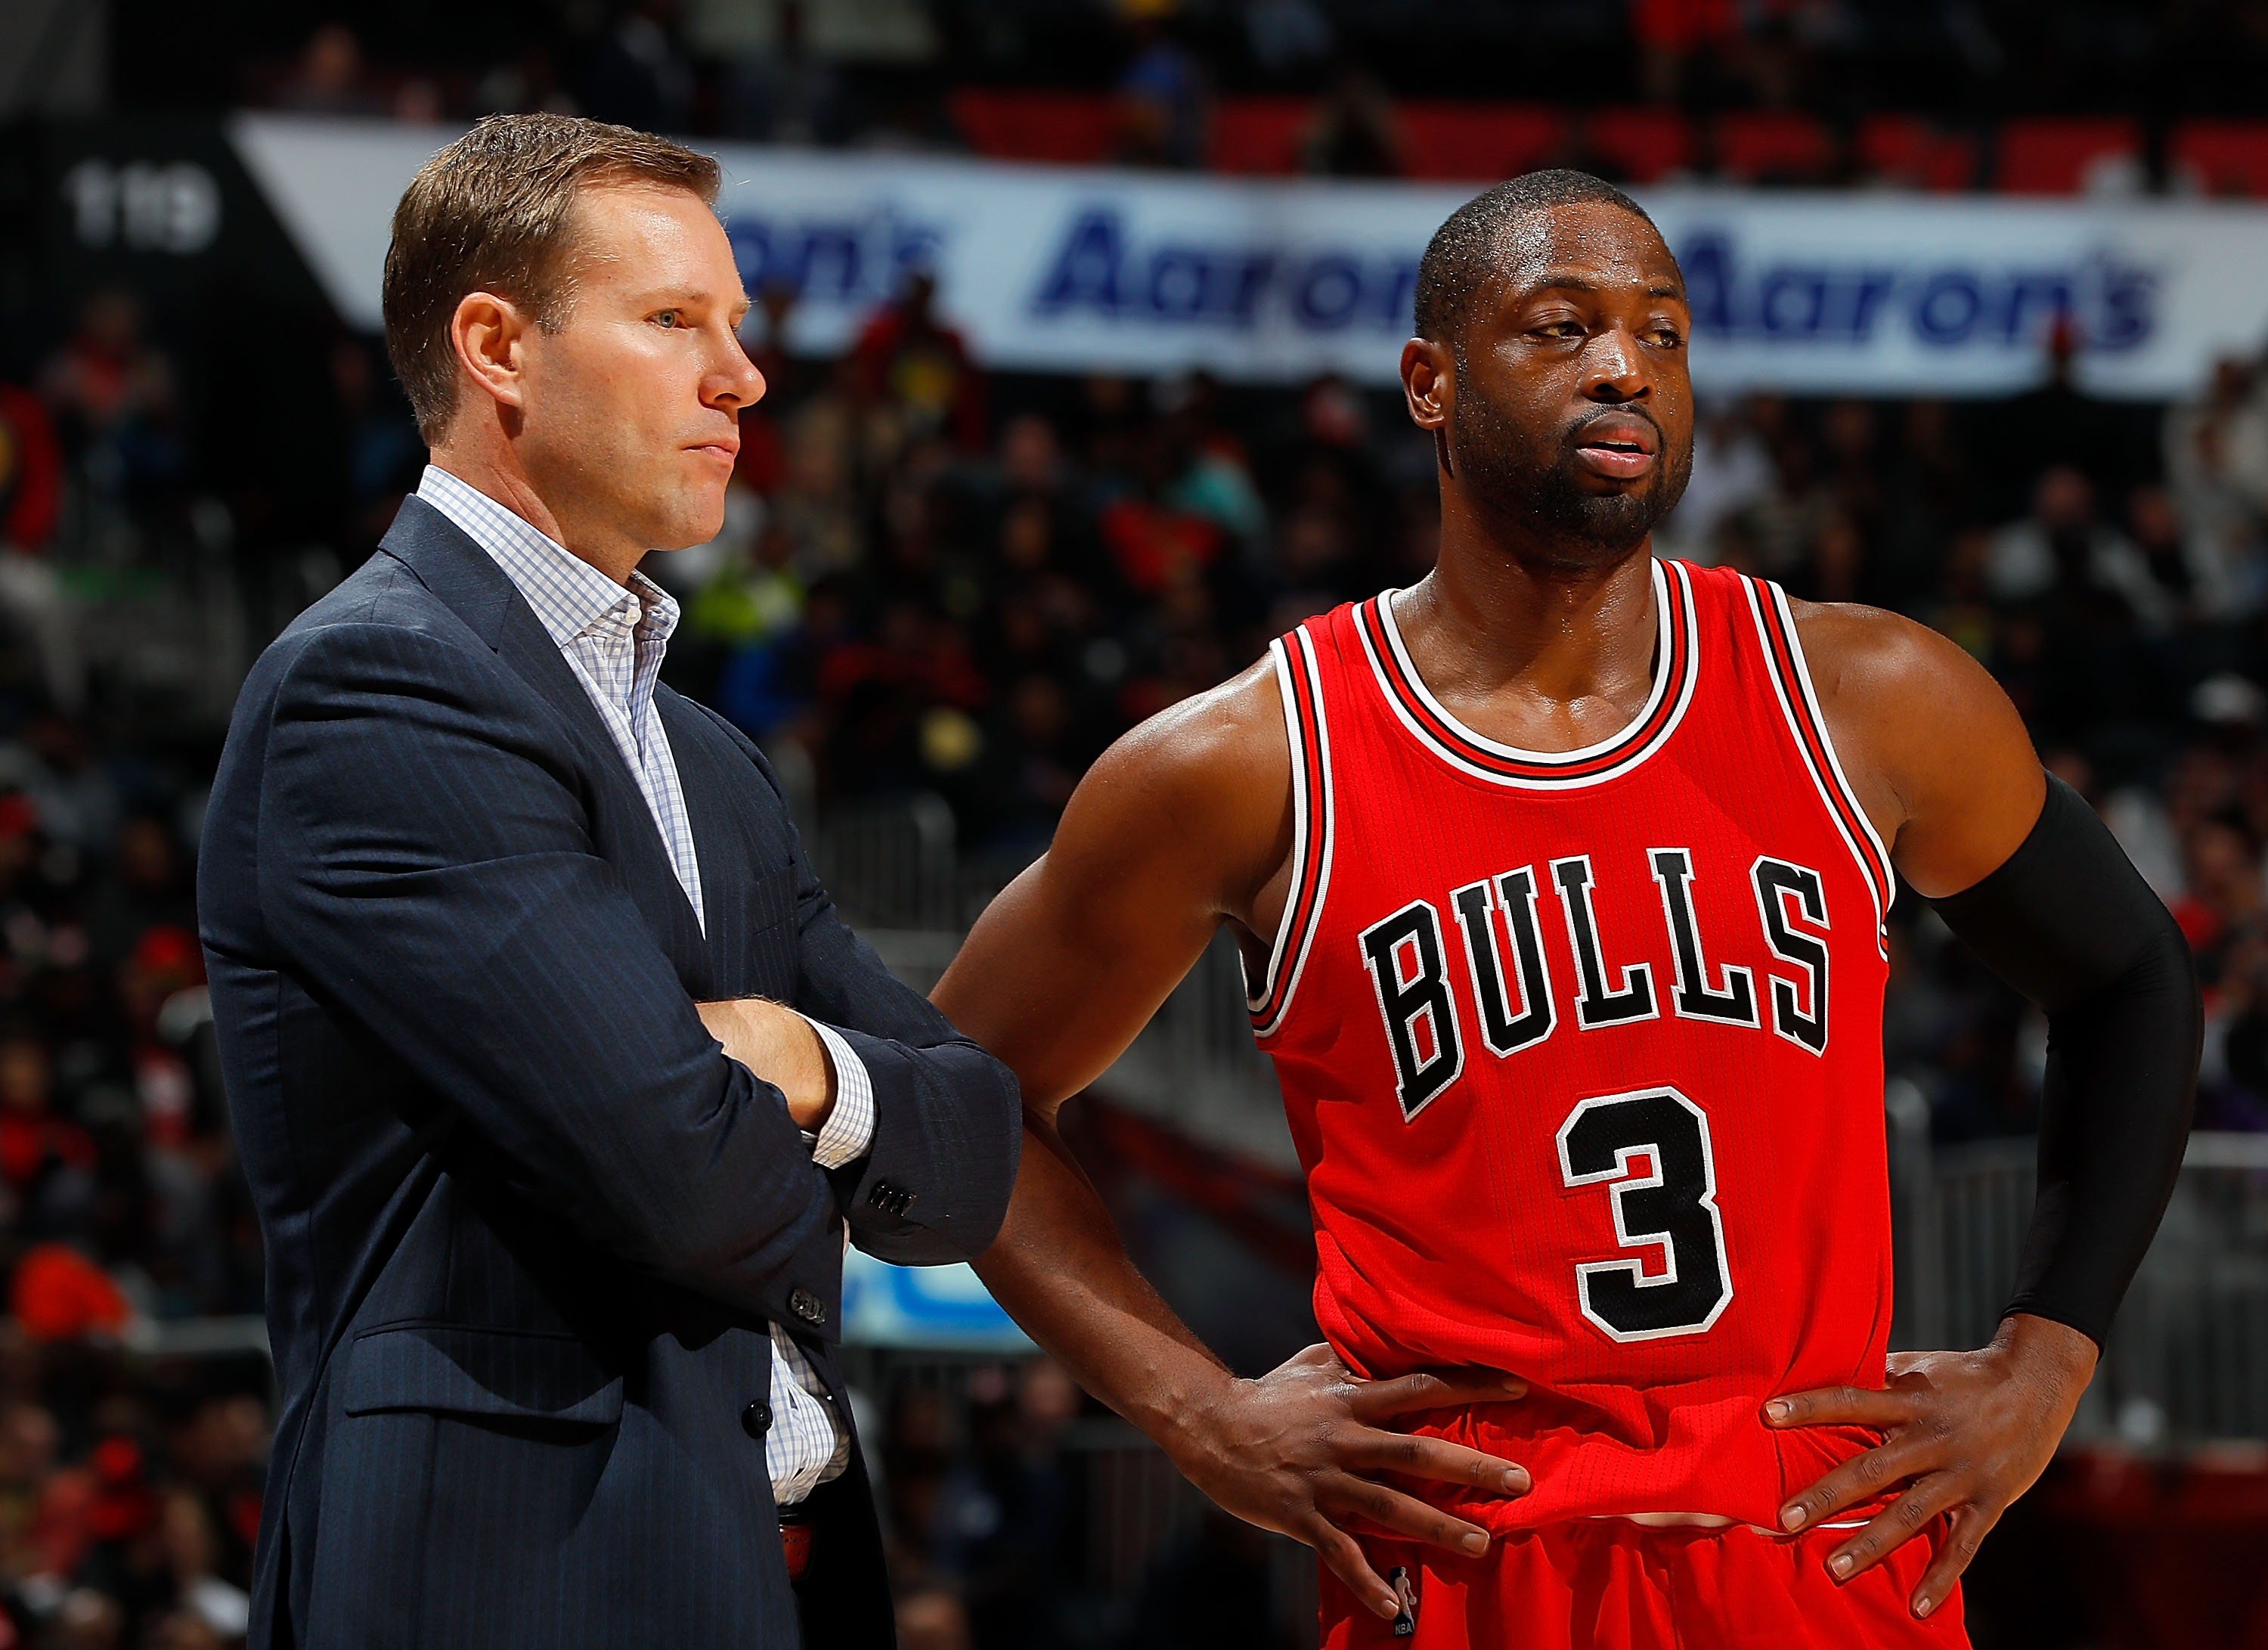 Dwyane Wade and the Chicago Bulls reached a buyout agreement Sunday